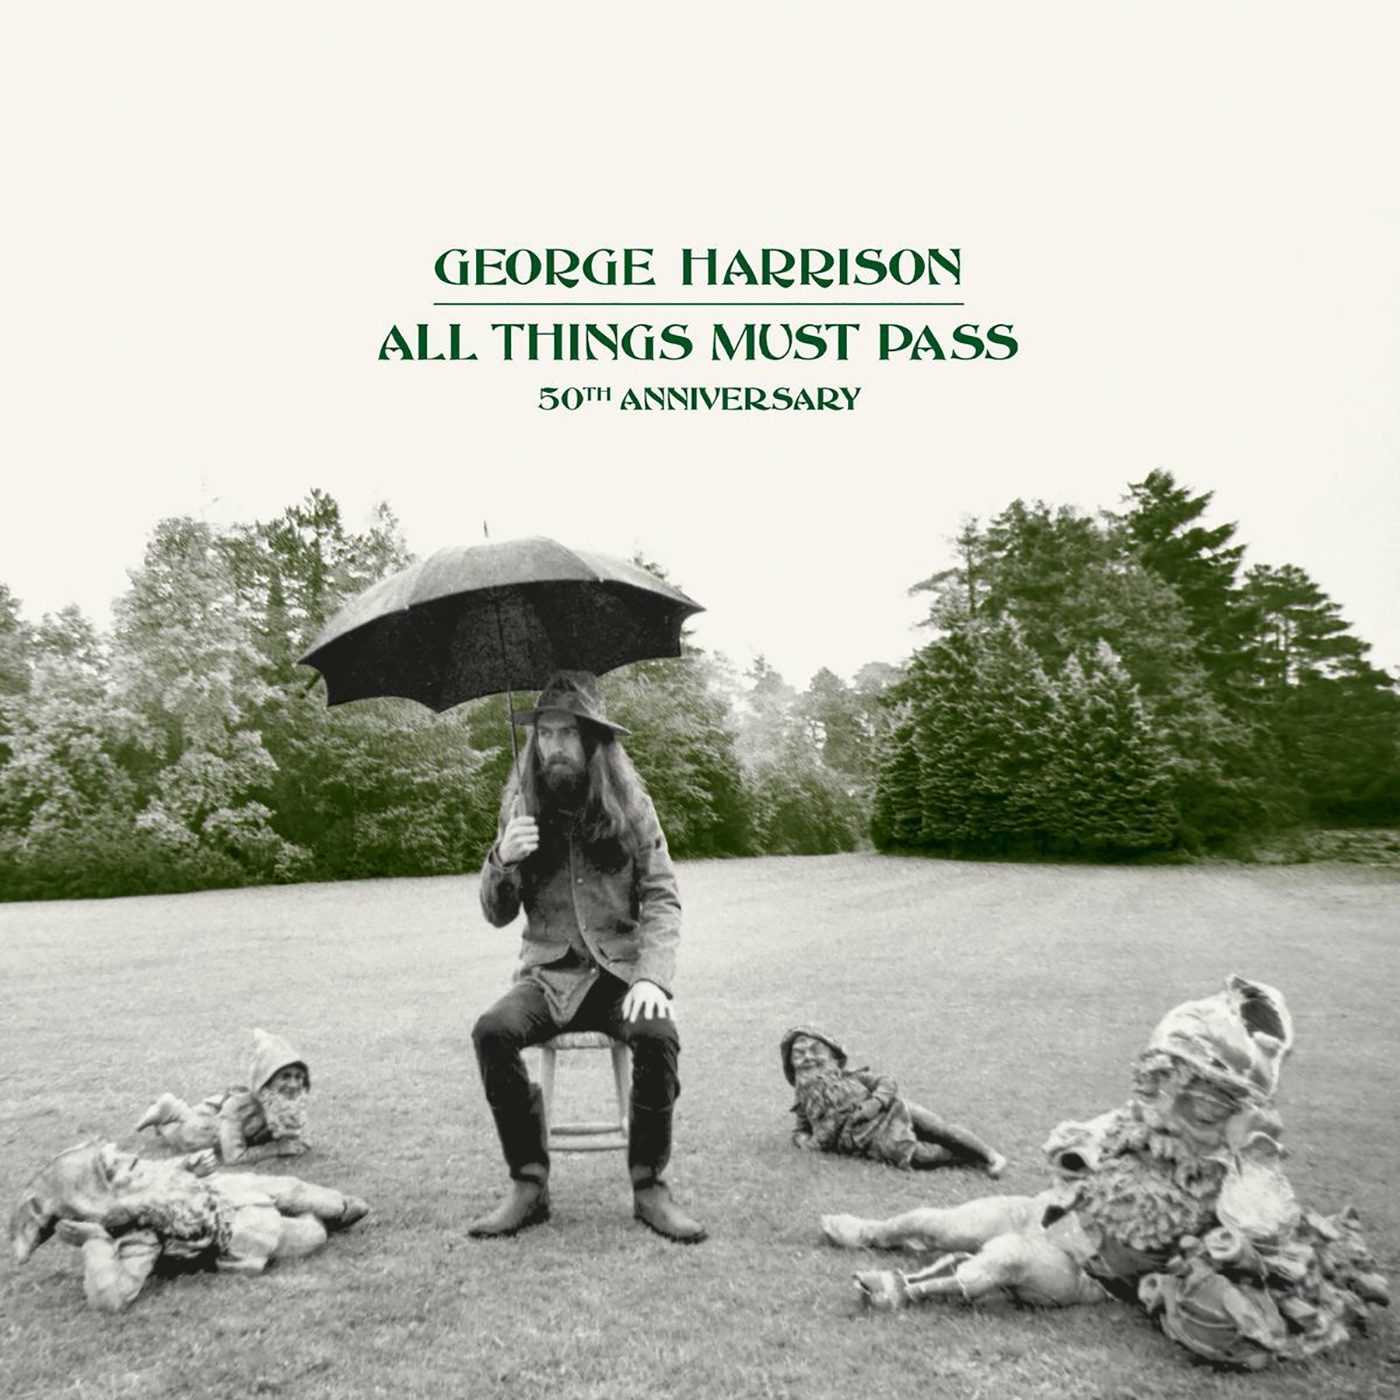 All Things Must Pass (50th Anniversary) by George Harrison